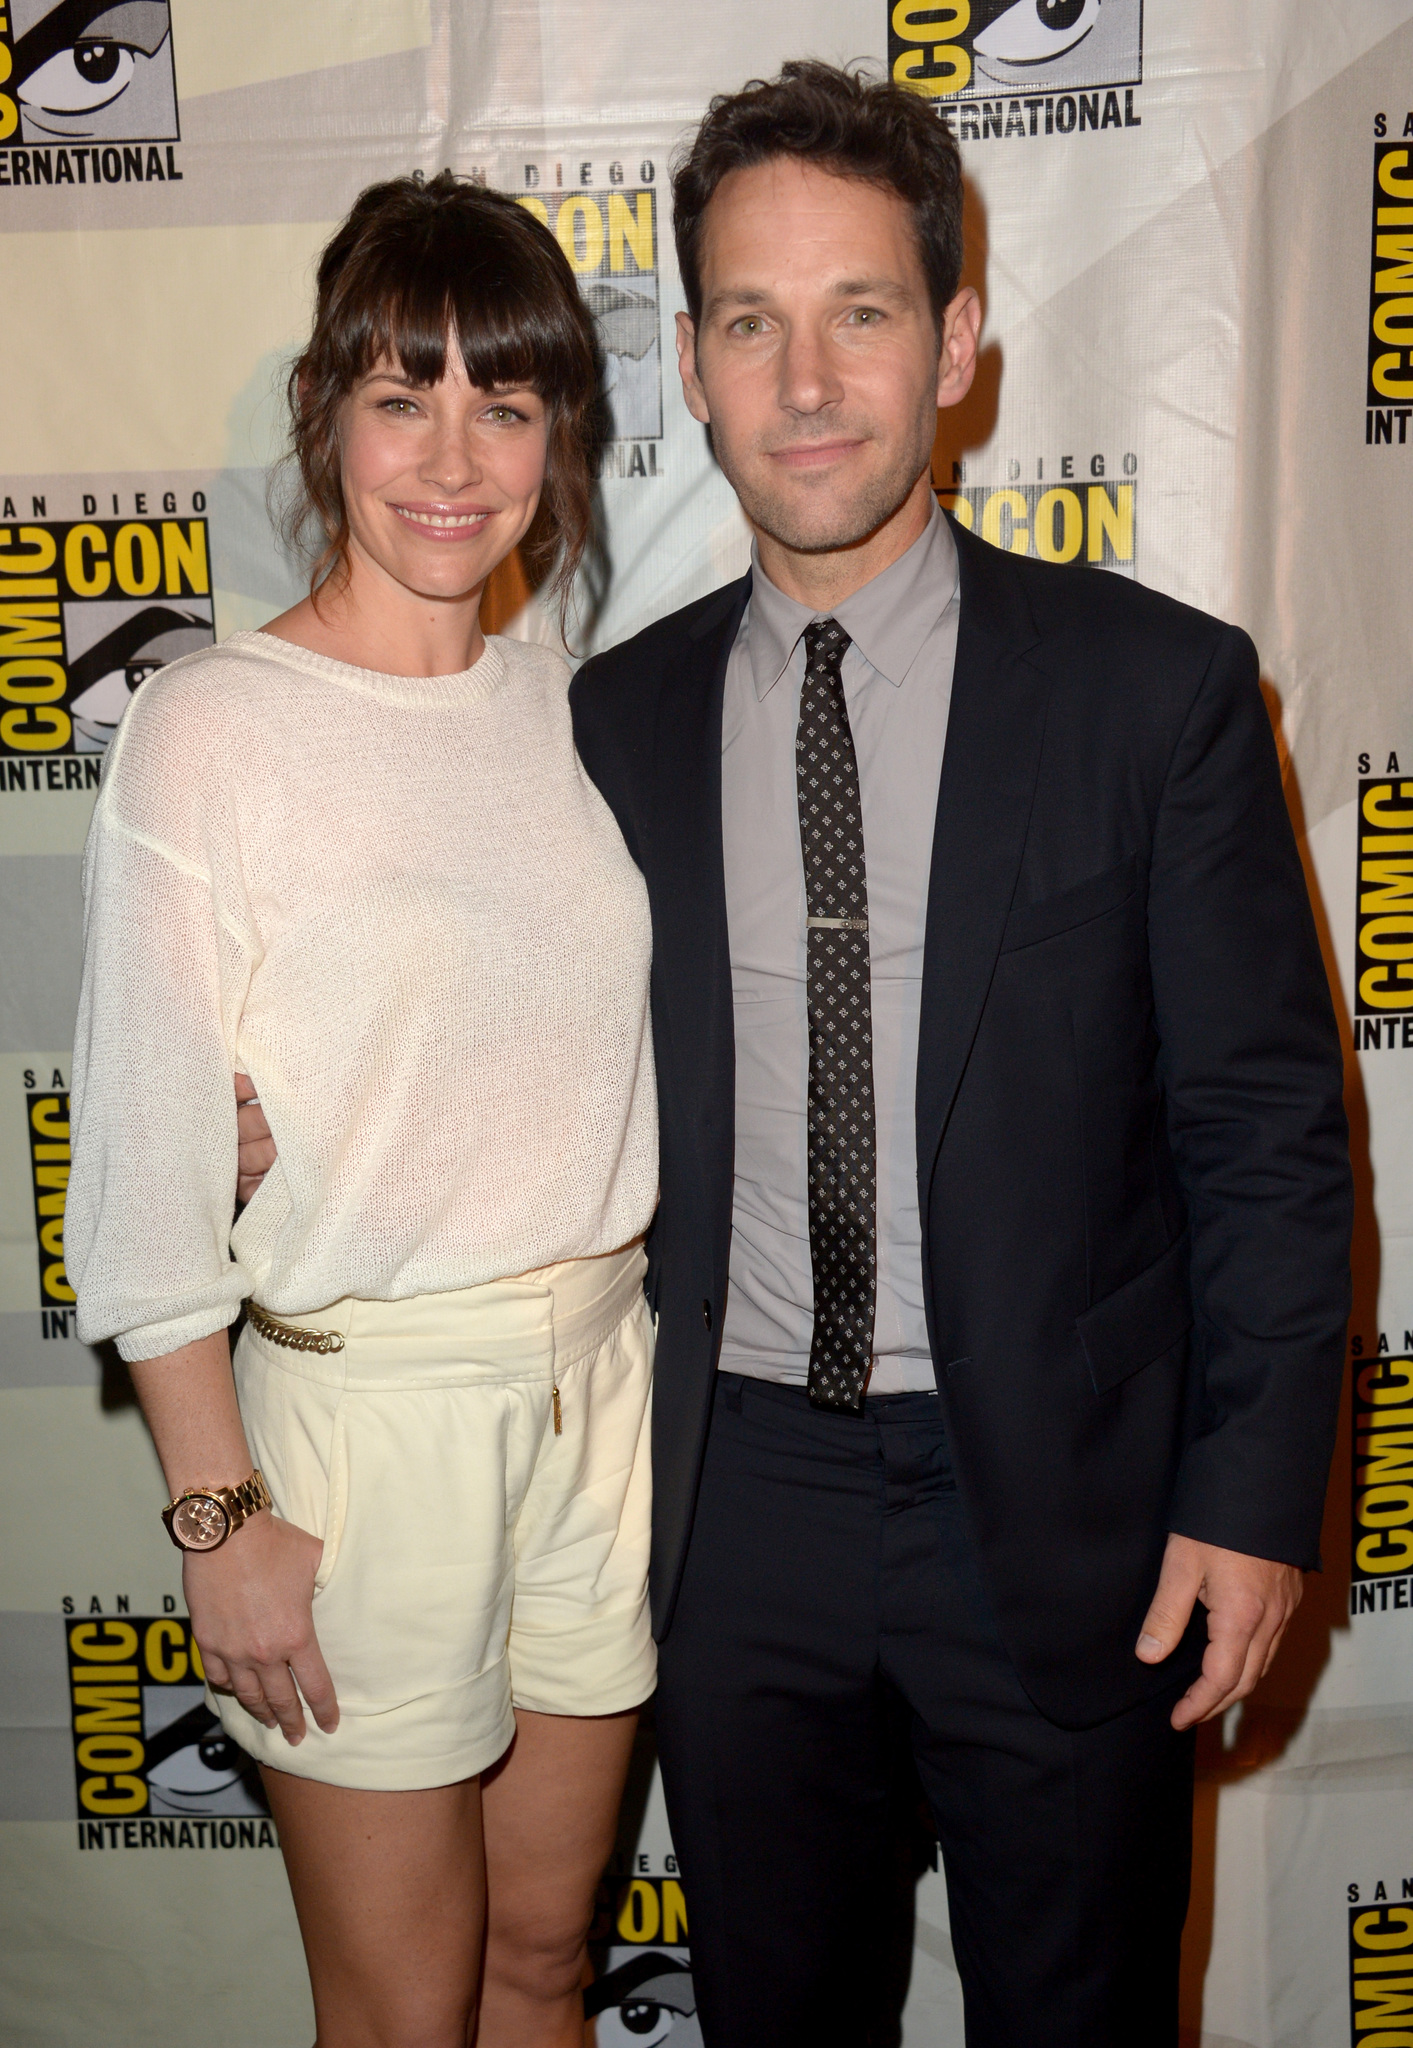 Paul Rudd and Evangeline Lilly